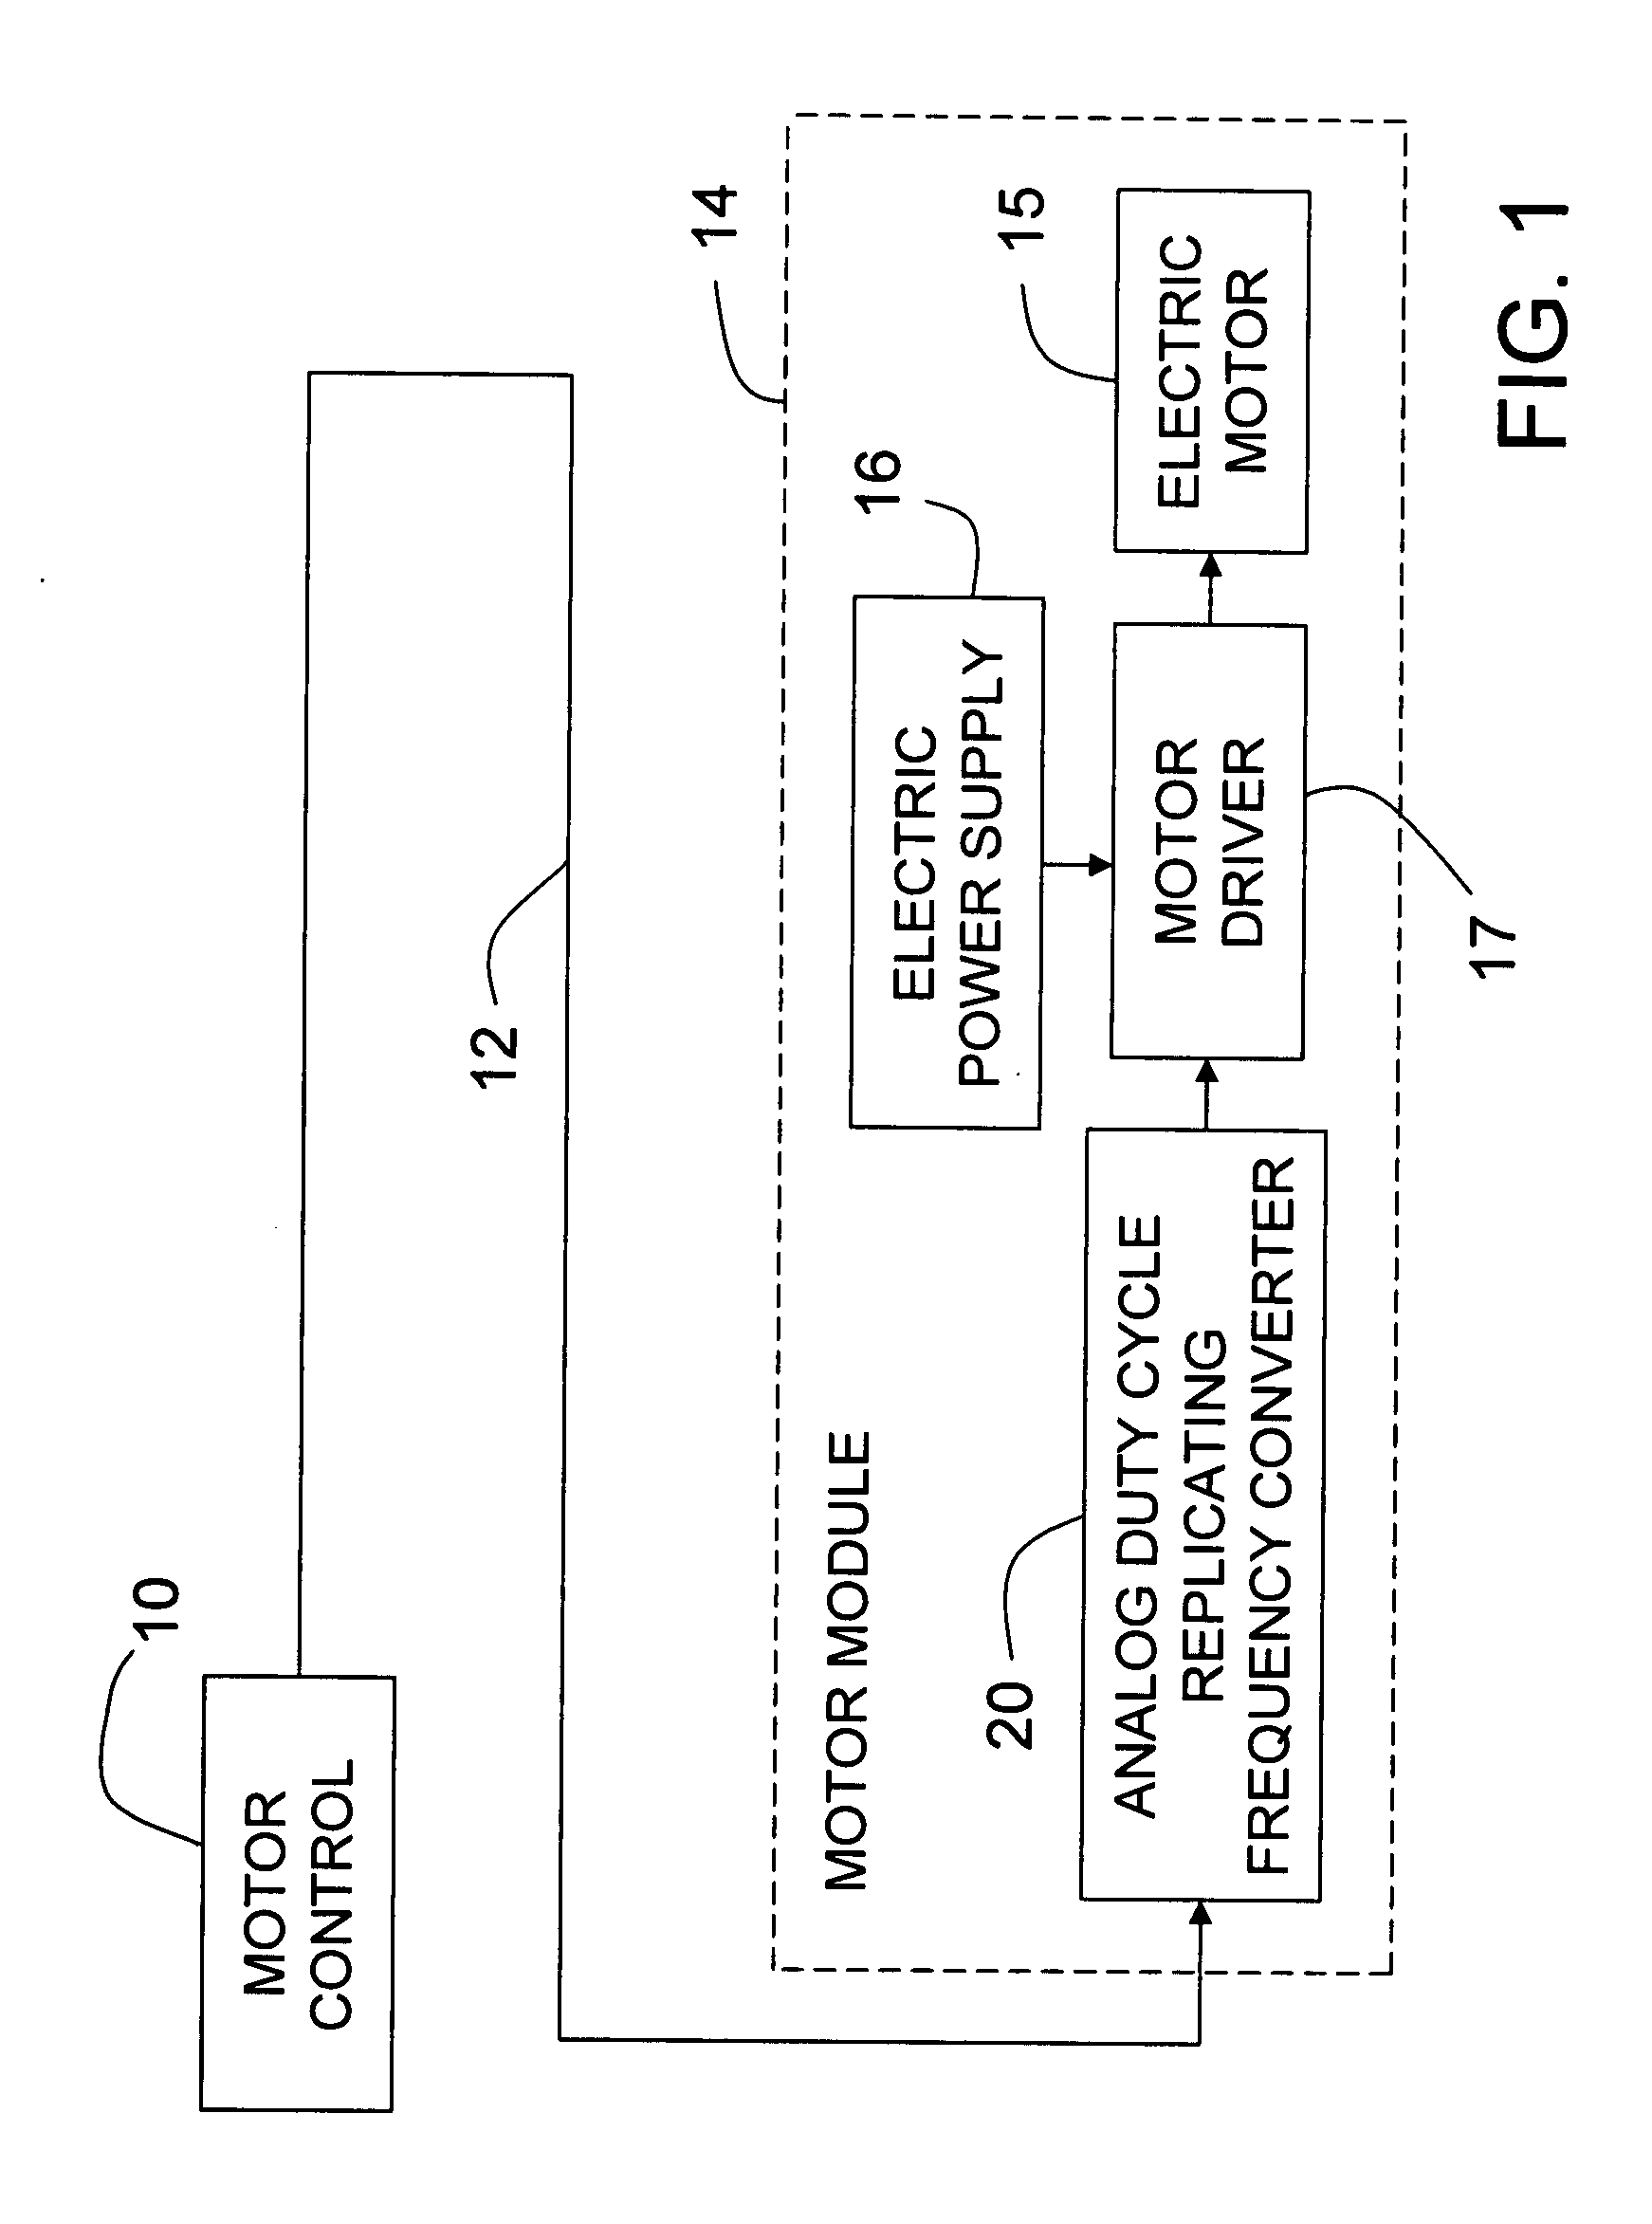 Analog duty cycle replicating frequency converter for pwm signals